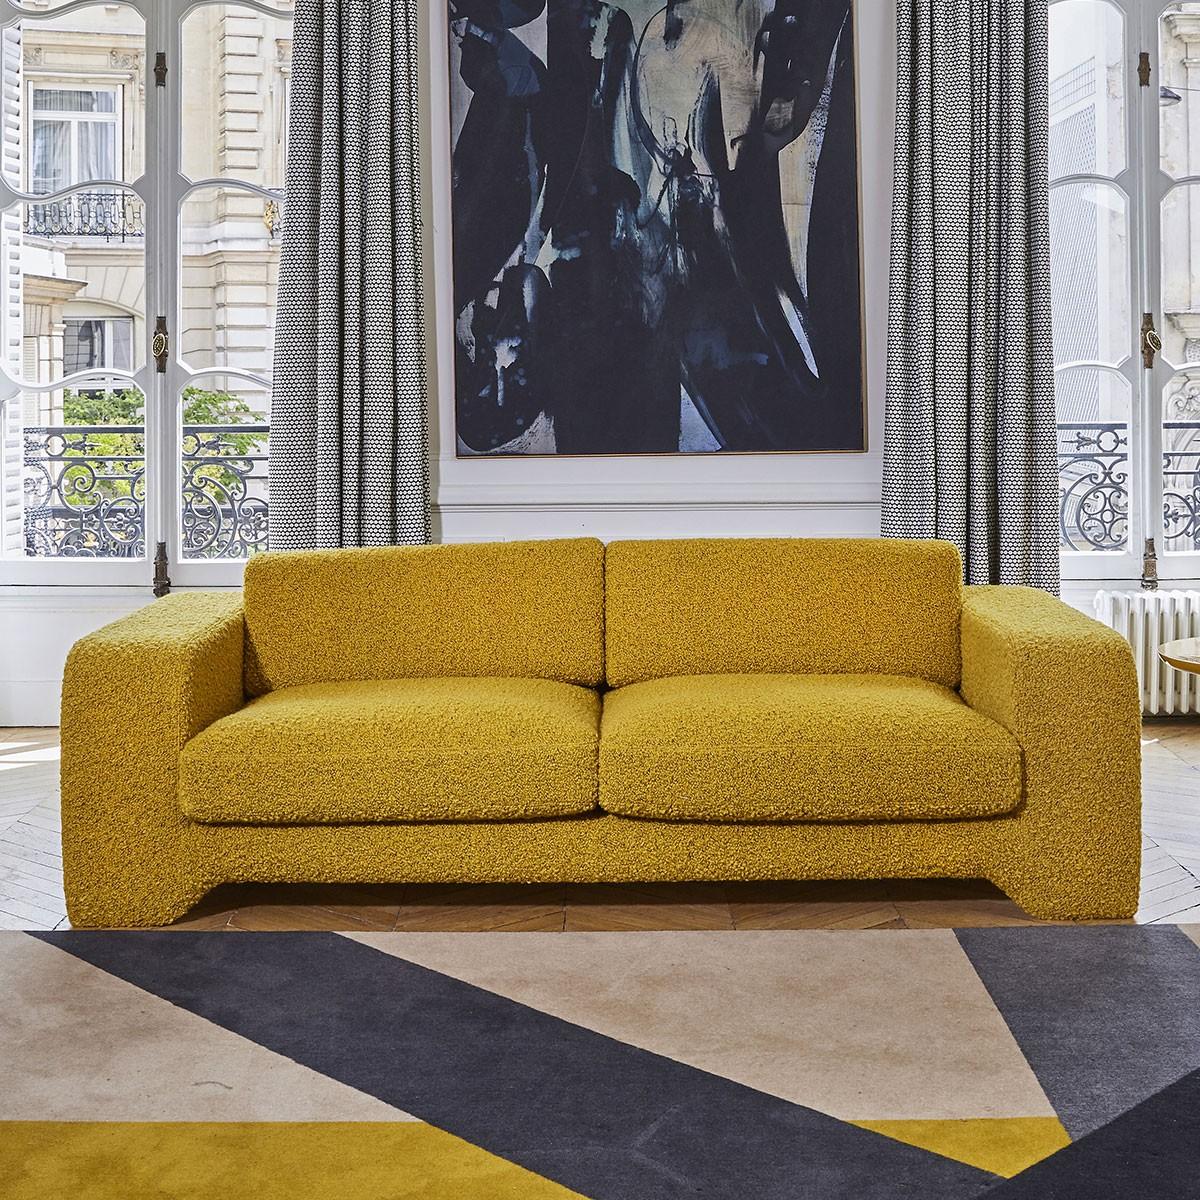 Popus Editions Giovanna 2.5 seater sofa in vermilion como velvet upholstery

Giovanna is a sofa with a strong profile. A sober, plush line, with this famous detail that changes everything, so as not to forget its strength of character and this